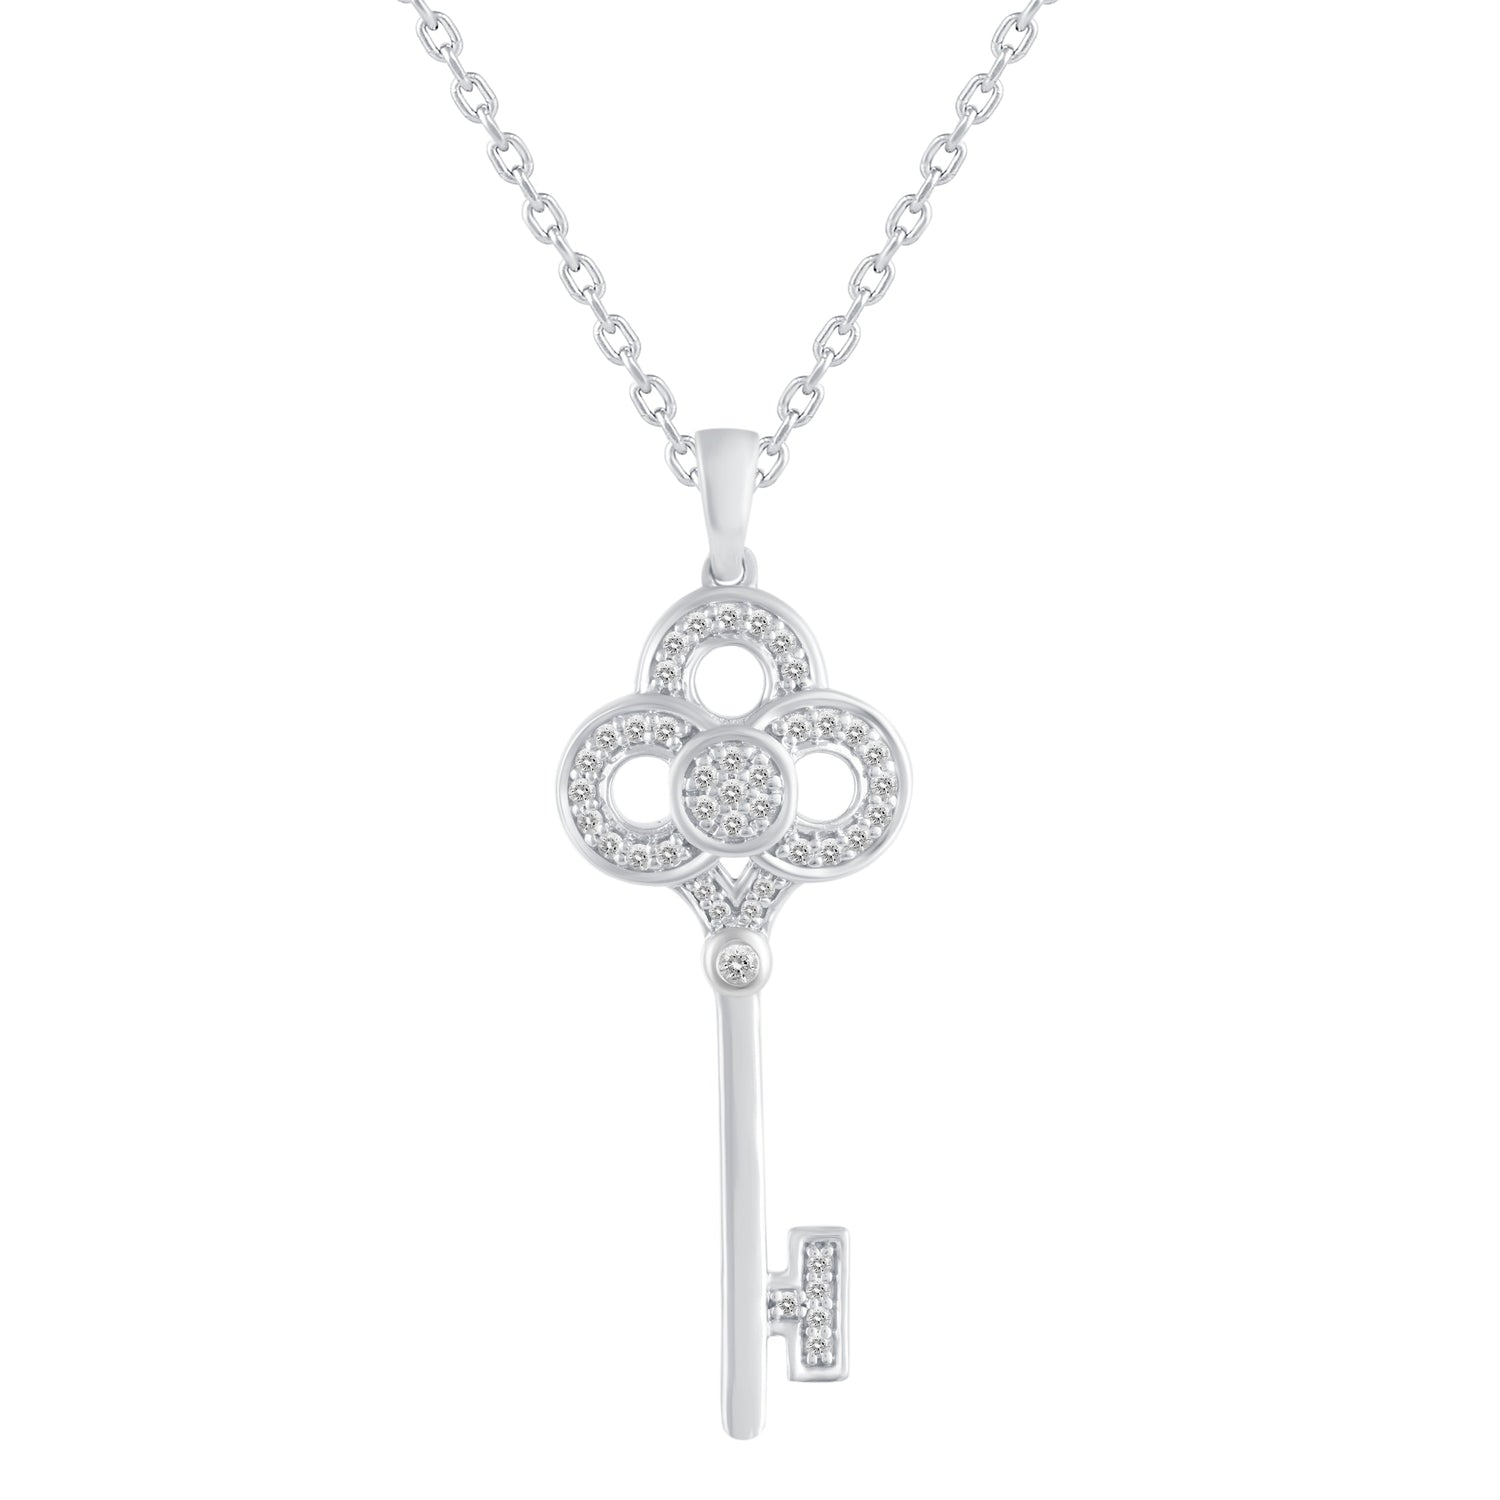 1/5 Cttw Diamond Key Pendant Necklace set in 925 Sterling Silver (Select Design : Daisy Flower, Clover, Four Leaf Clover, Crown, Enchanted)